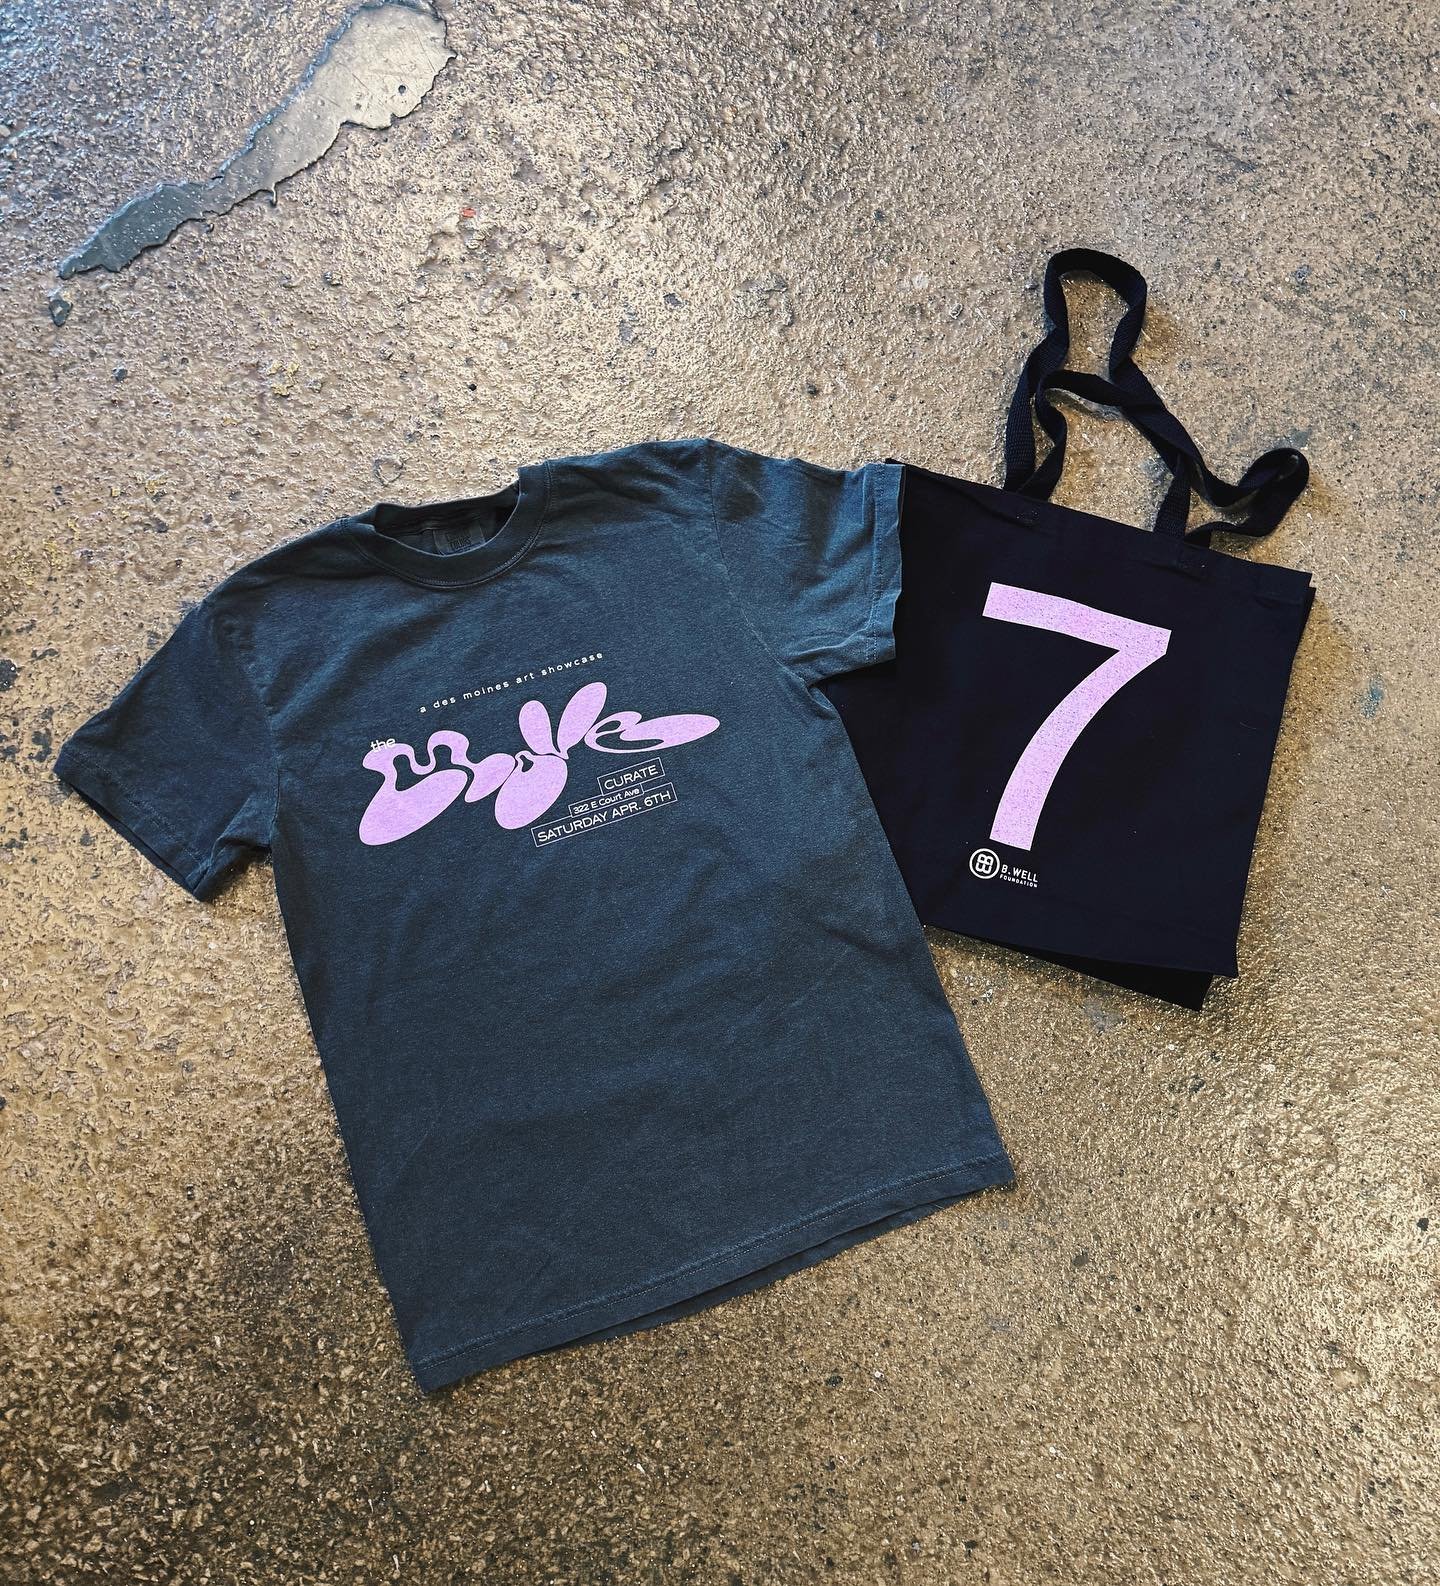 Shirts and totes printed for THE MOVE 7